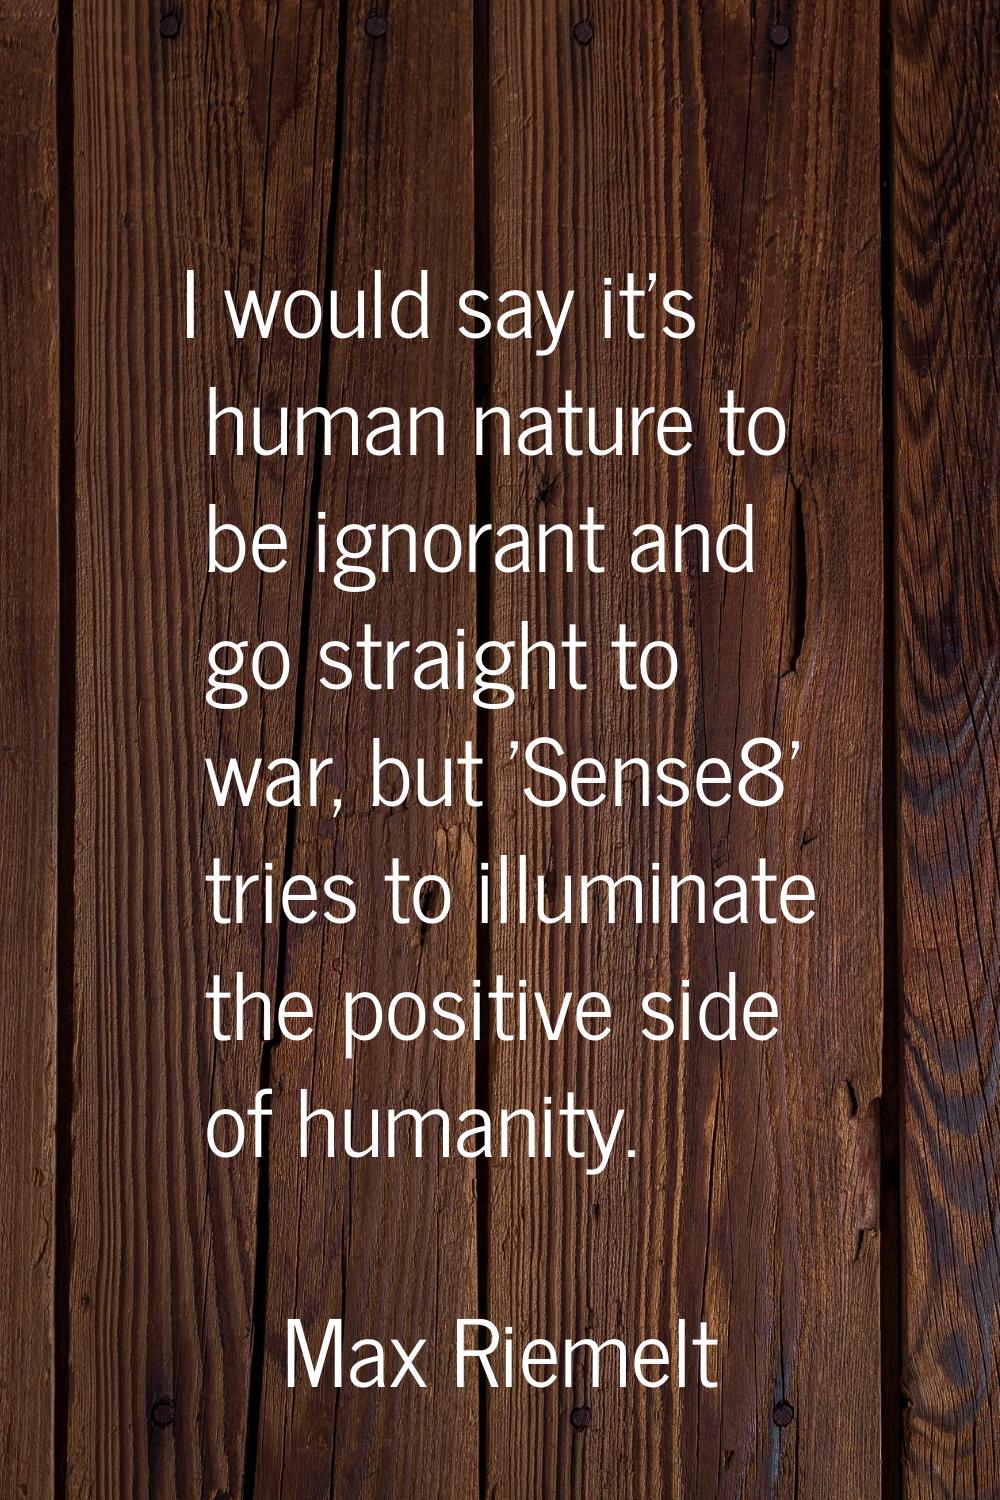 I would say it's human nature to be ignorant and go straight to war, but 'Sense8' tries to illumina